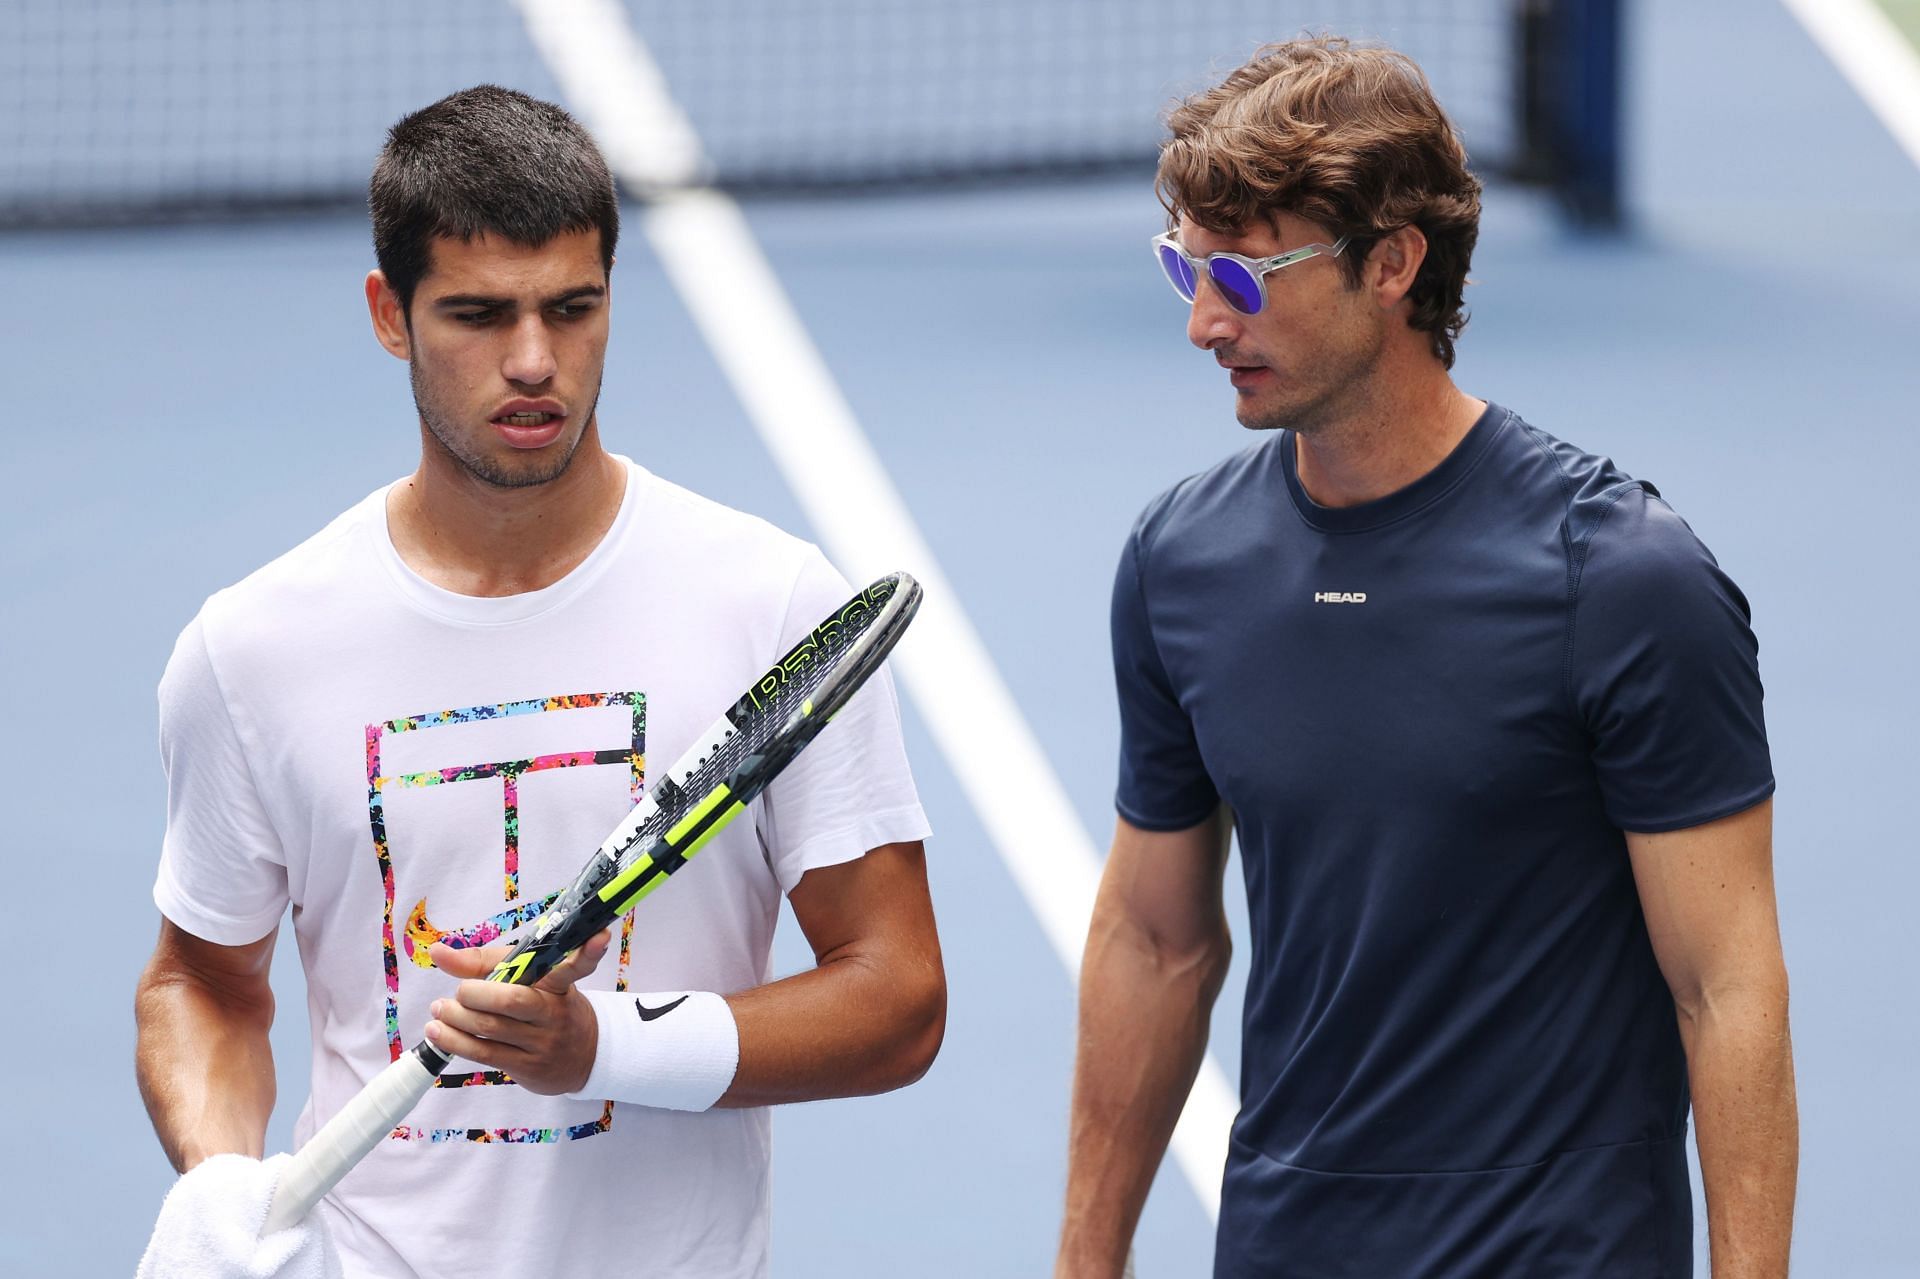 Carlos Alcaraz (L) talks with his coach Juan Carlos Ferrero (R) during a practice session before the start of the 2022 US Open